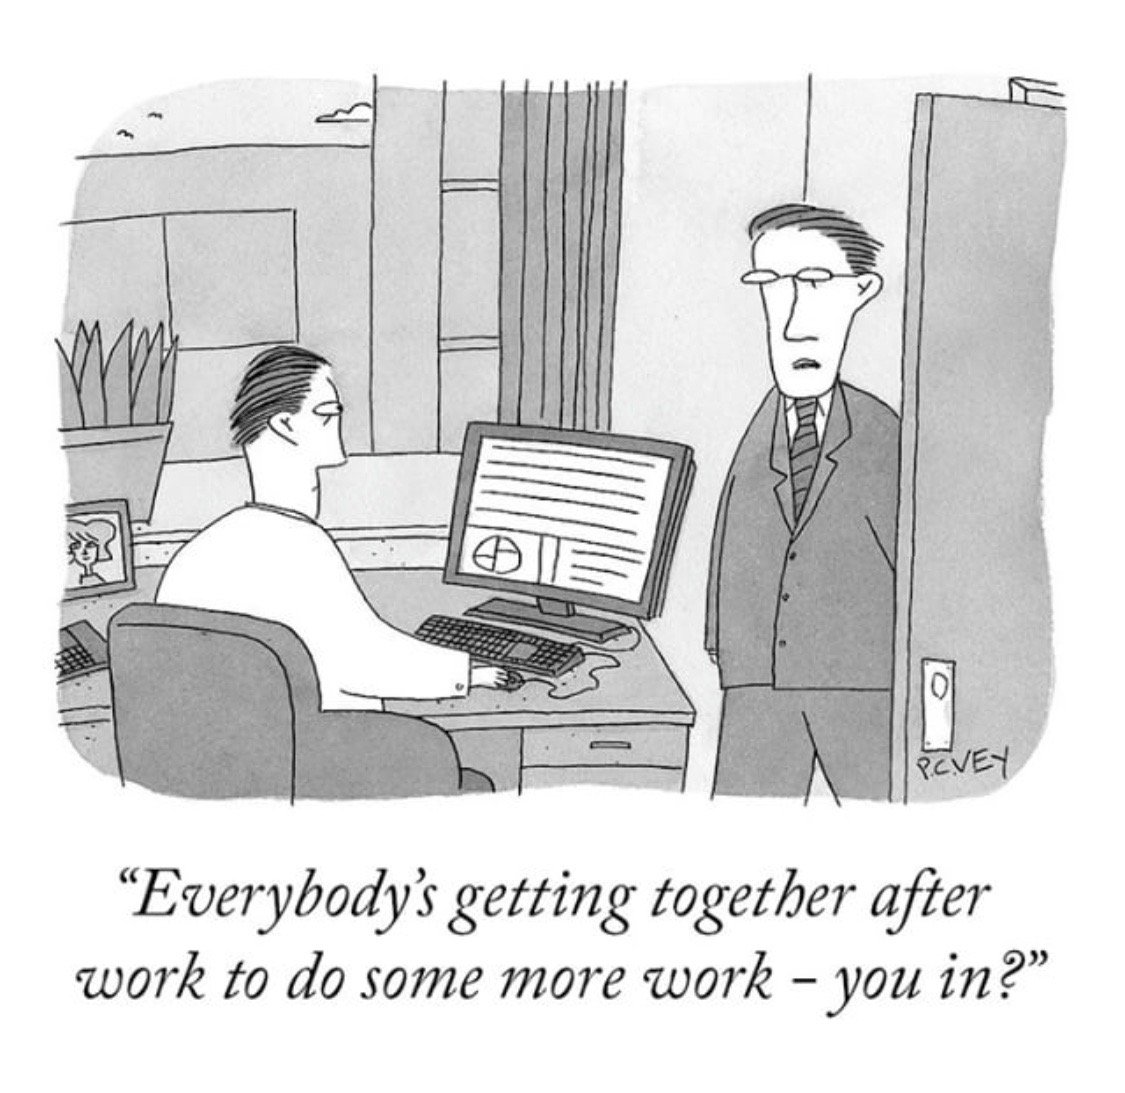 Hey guys, let's do some work after work. #TNYcartoons https://t.co/WAfTqtLsof